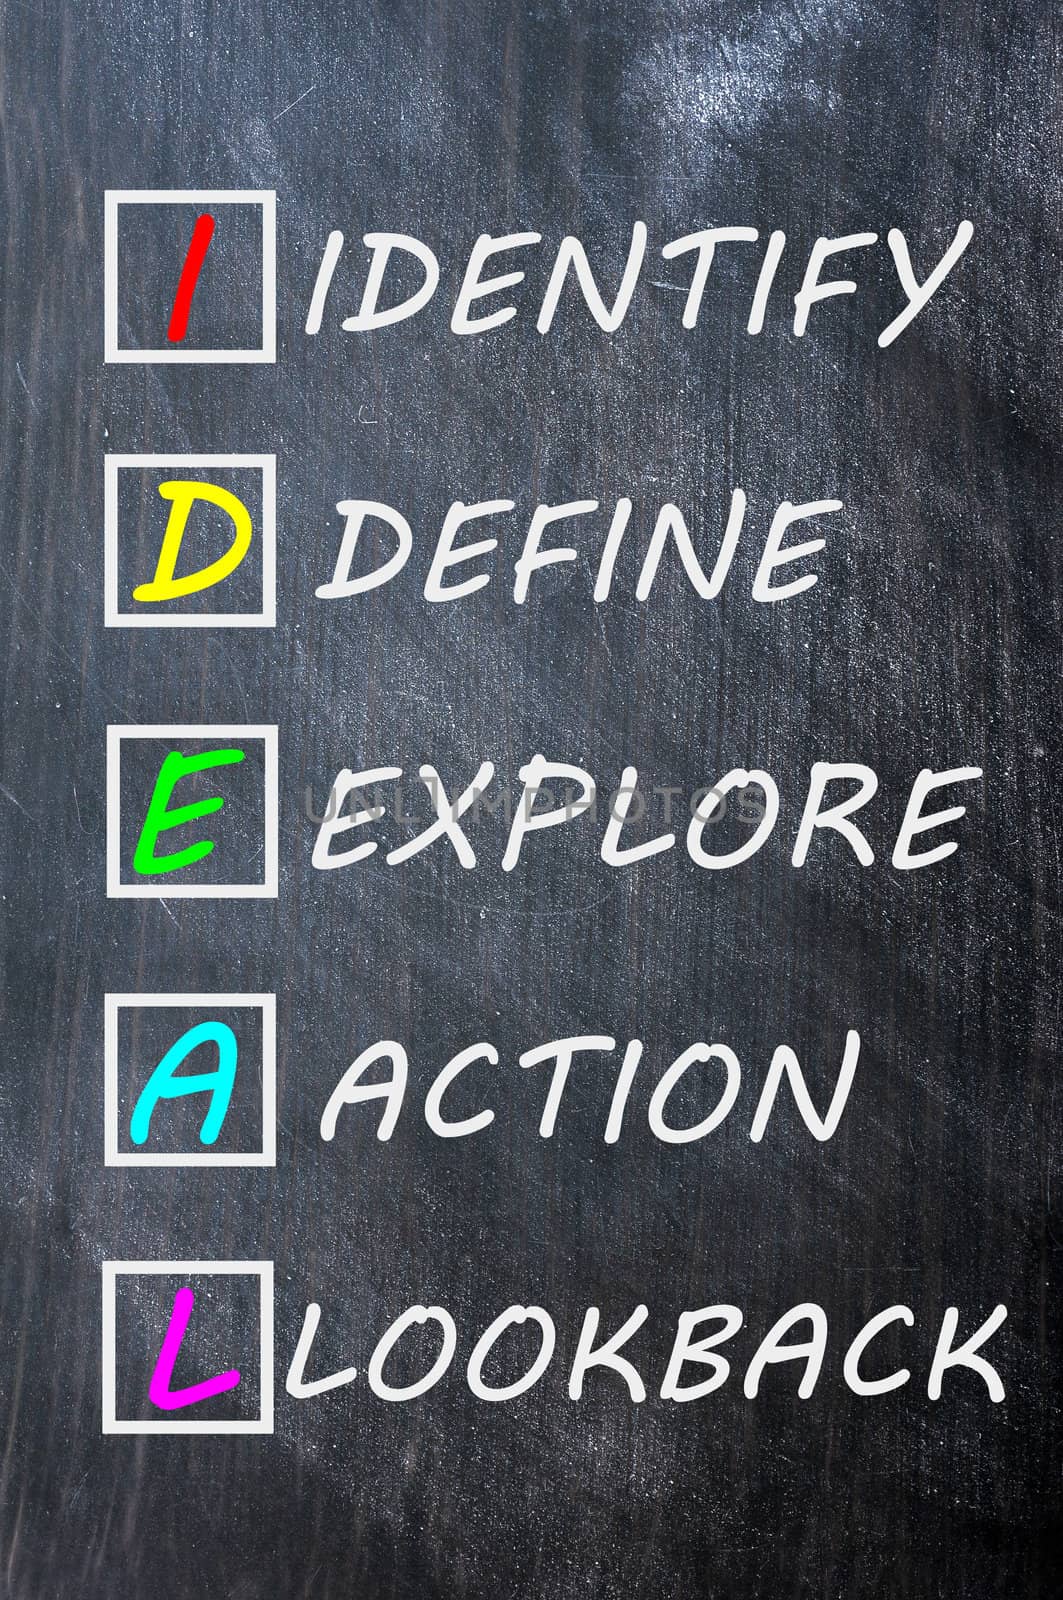 Acronym of IDEAL for identify,define,explore,action and lookback on a smudged blackboard